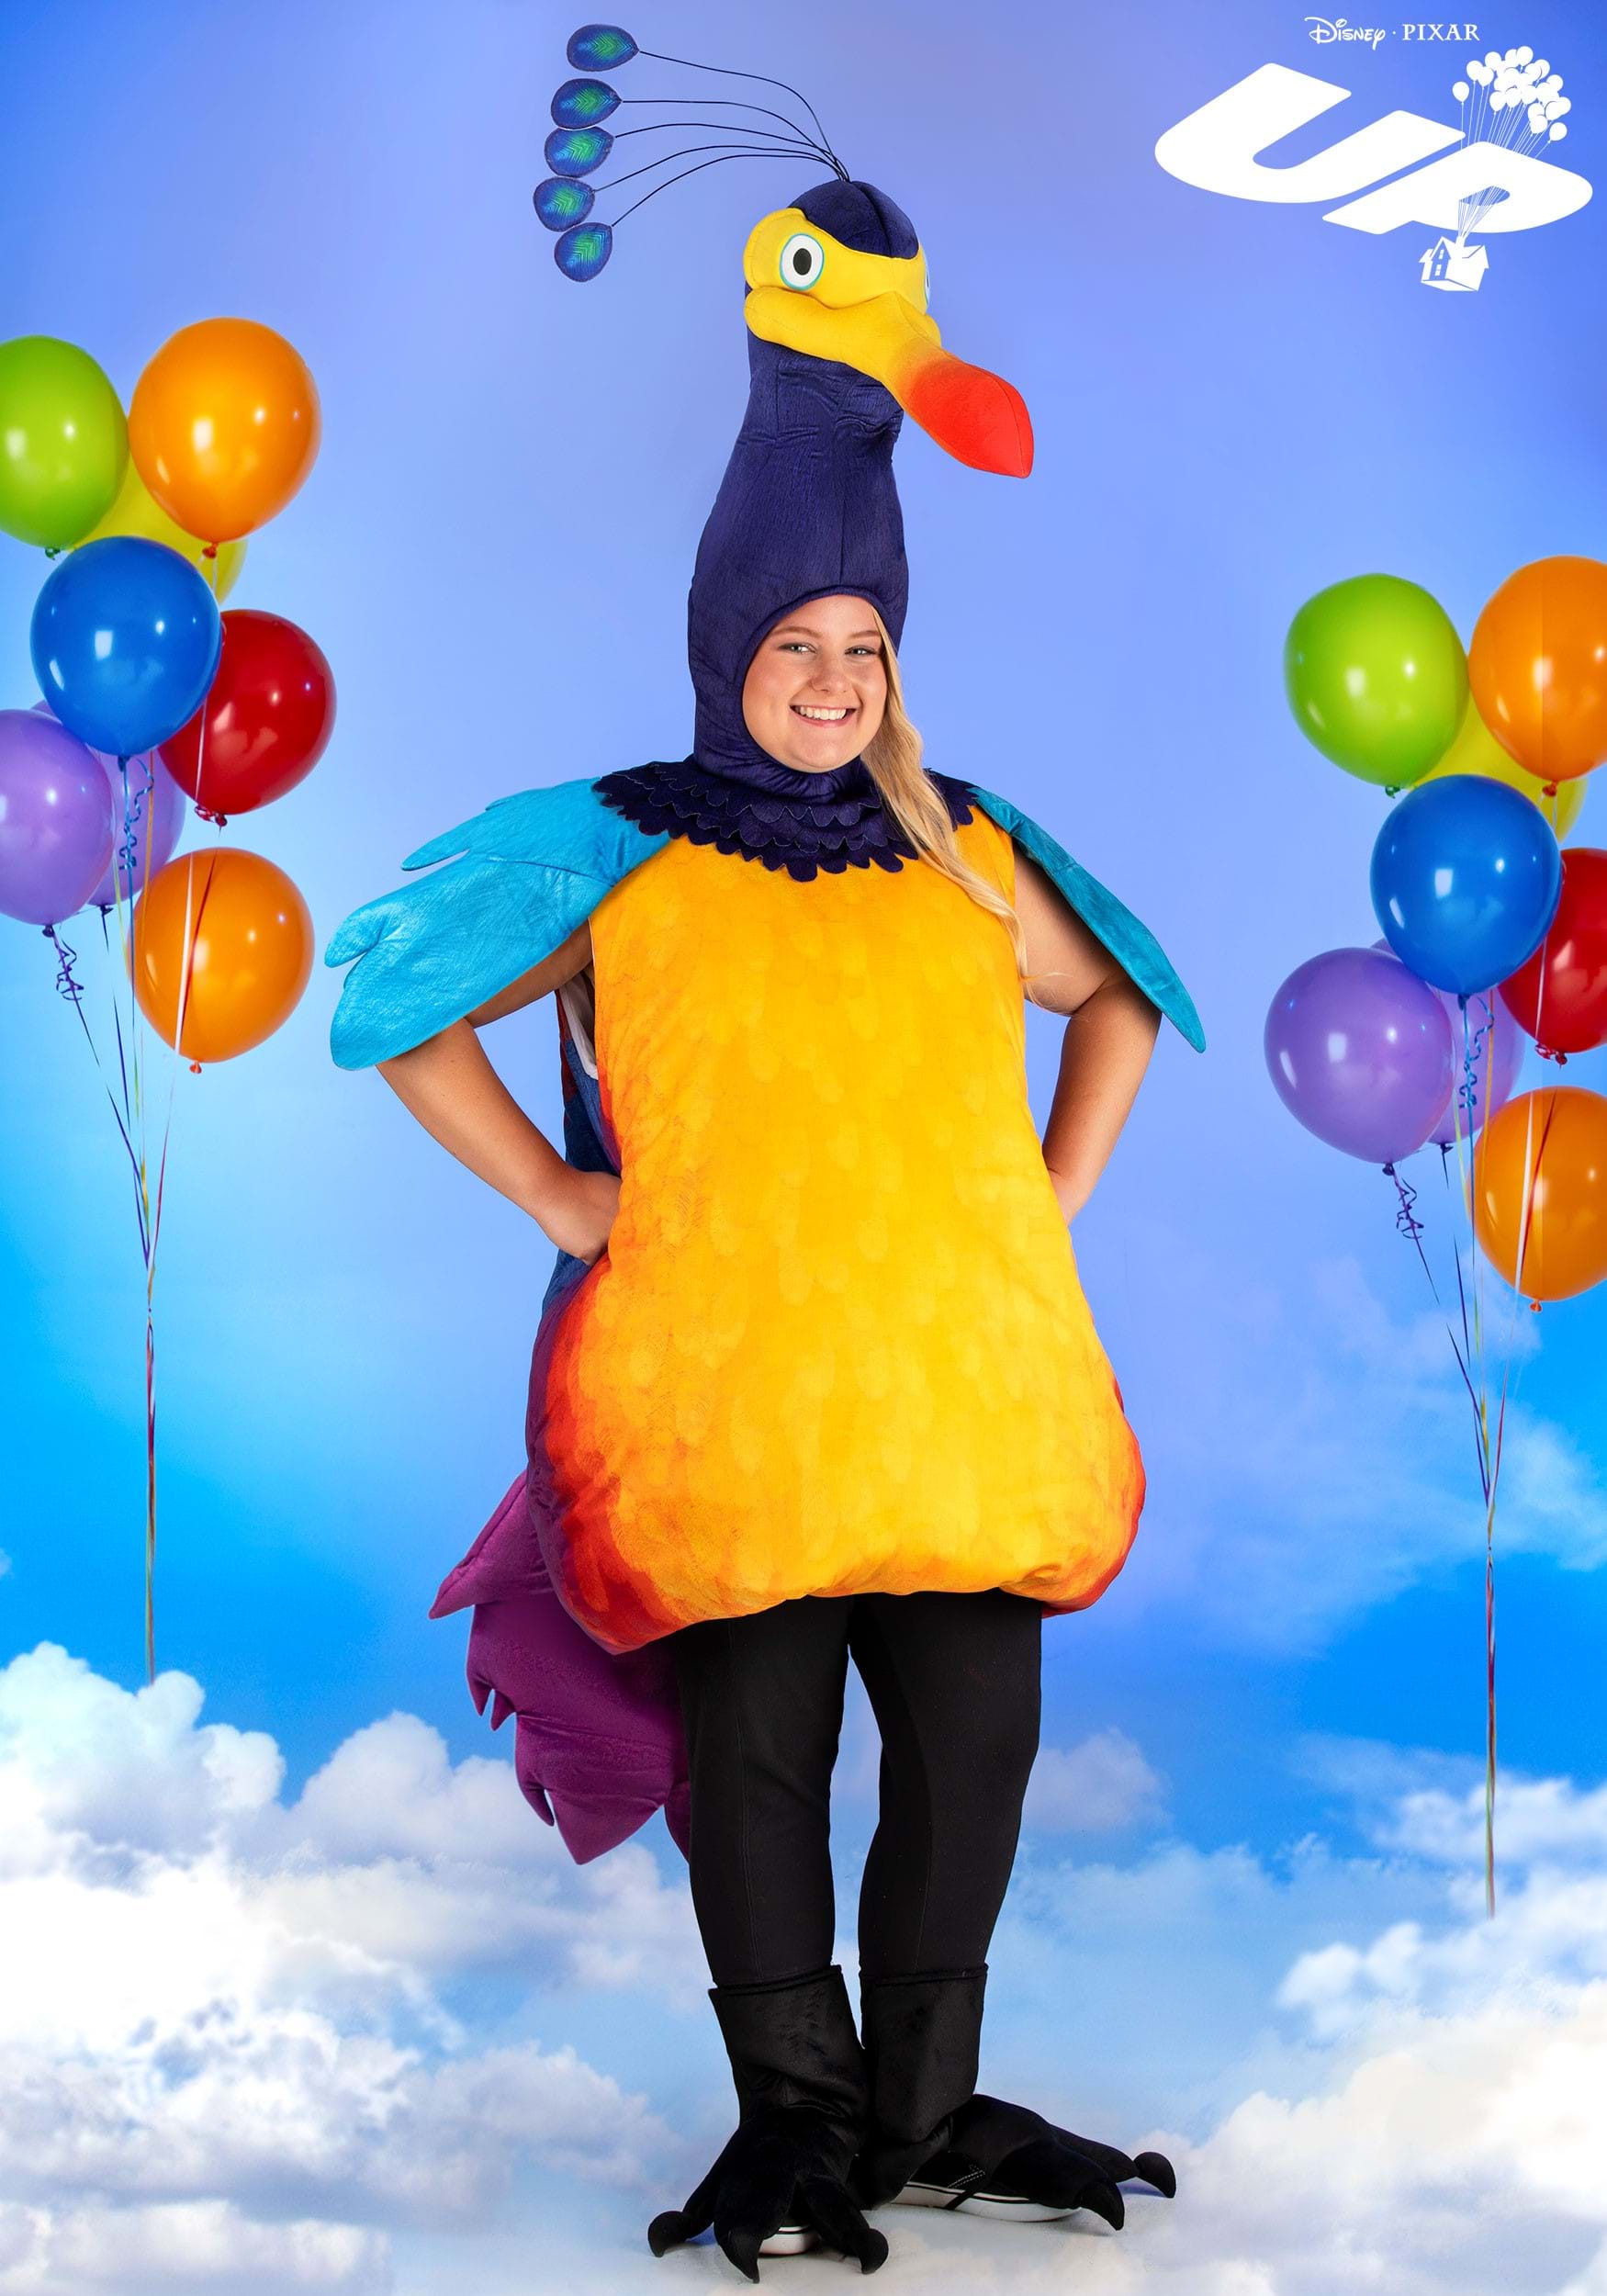 https://images.halloweencostumes.com/products/74440/1-1/adult-plus-size-disney-up-kevin-costume-upd-main.jpg